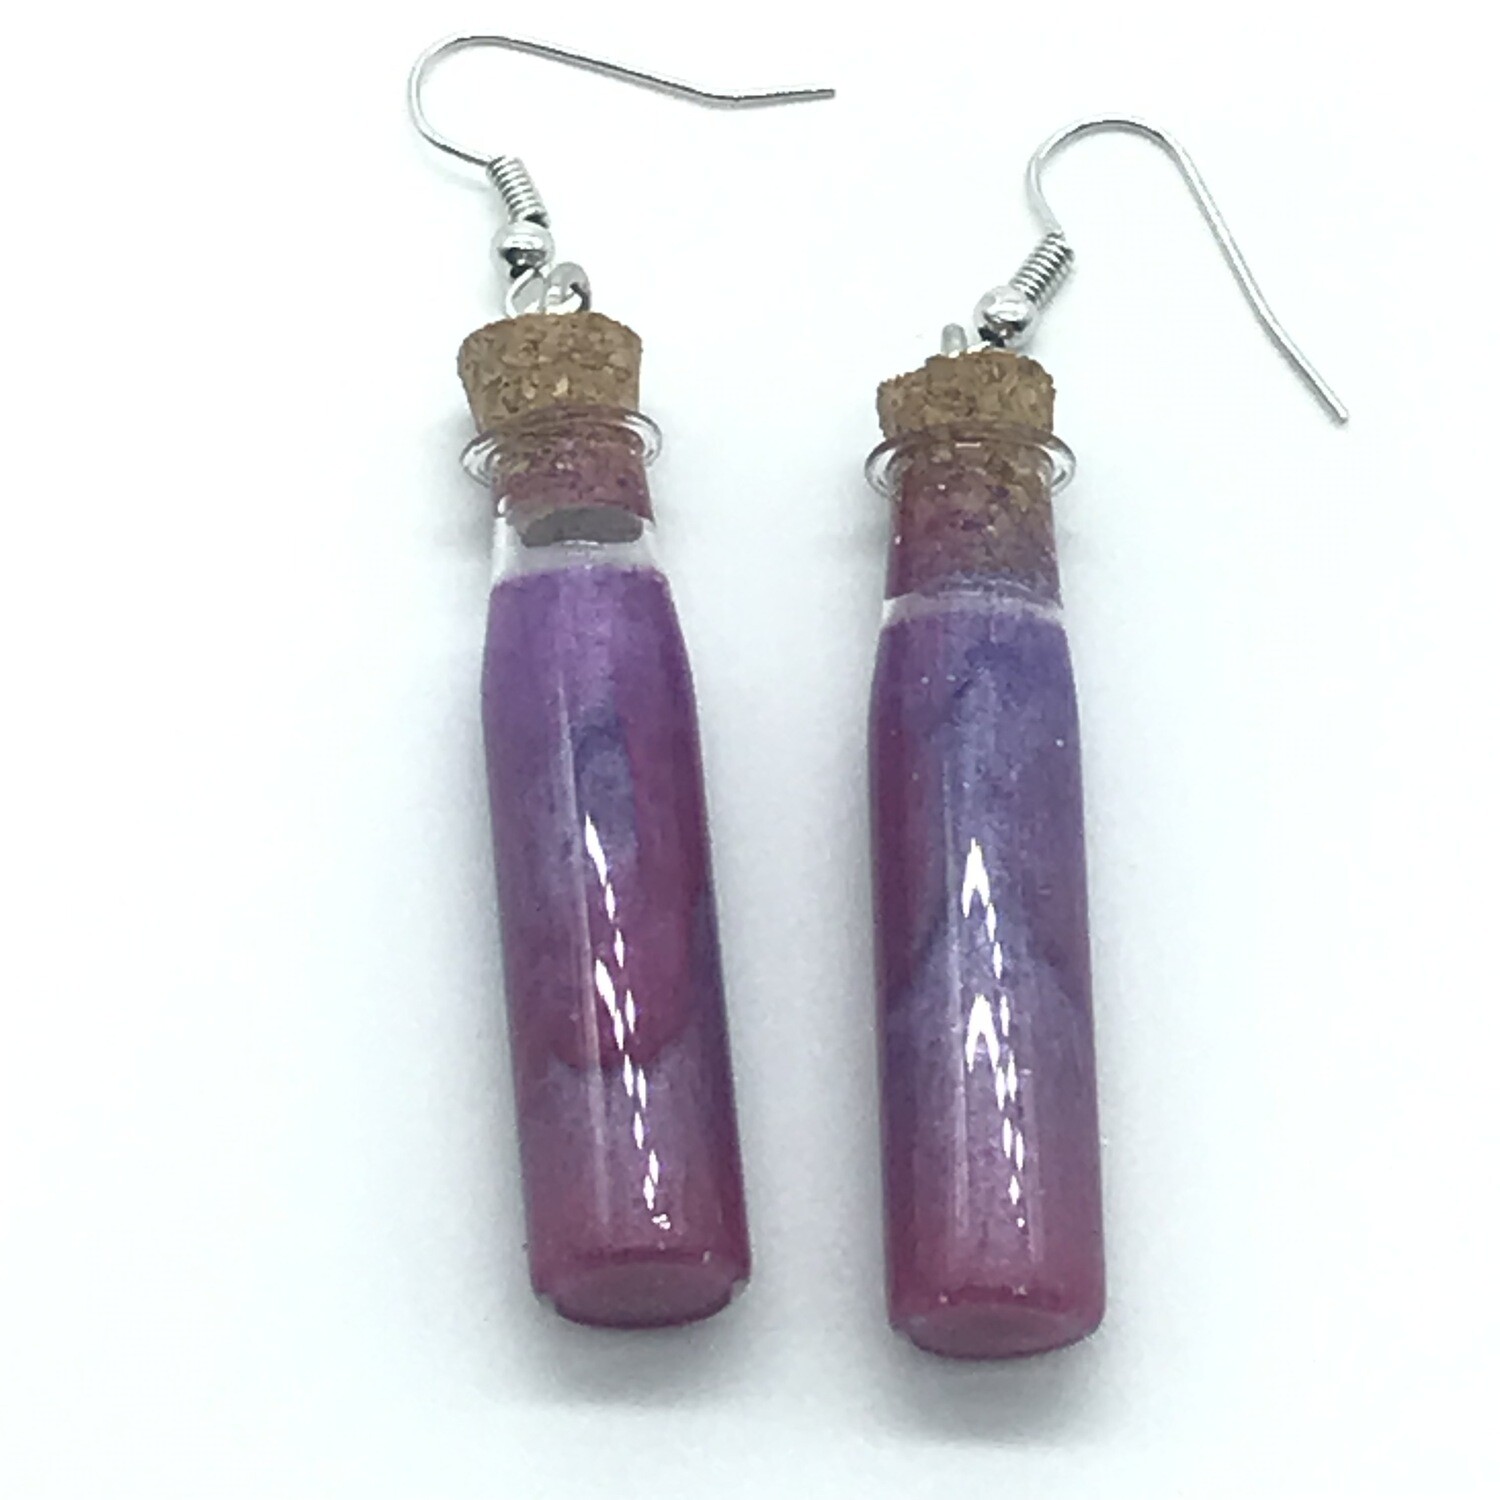 Potion Earrings - Fuchsia and lavender, long cylinder bottle